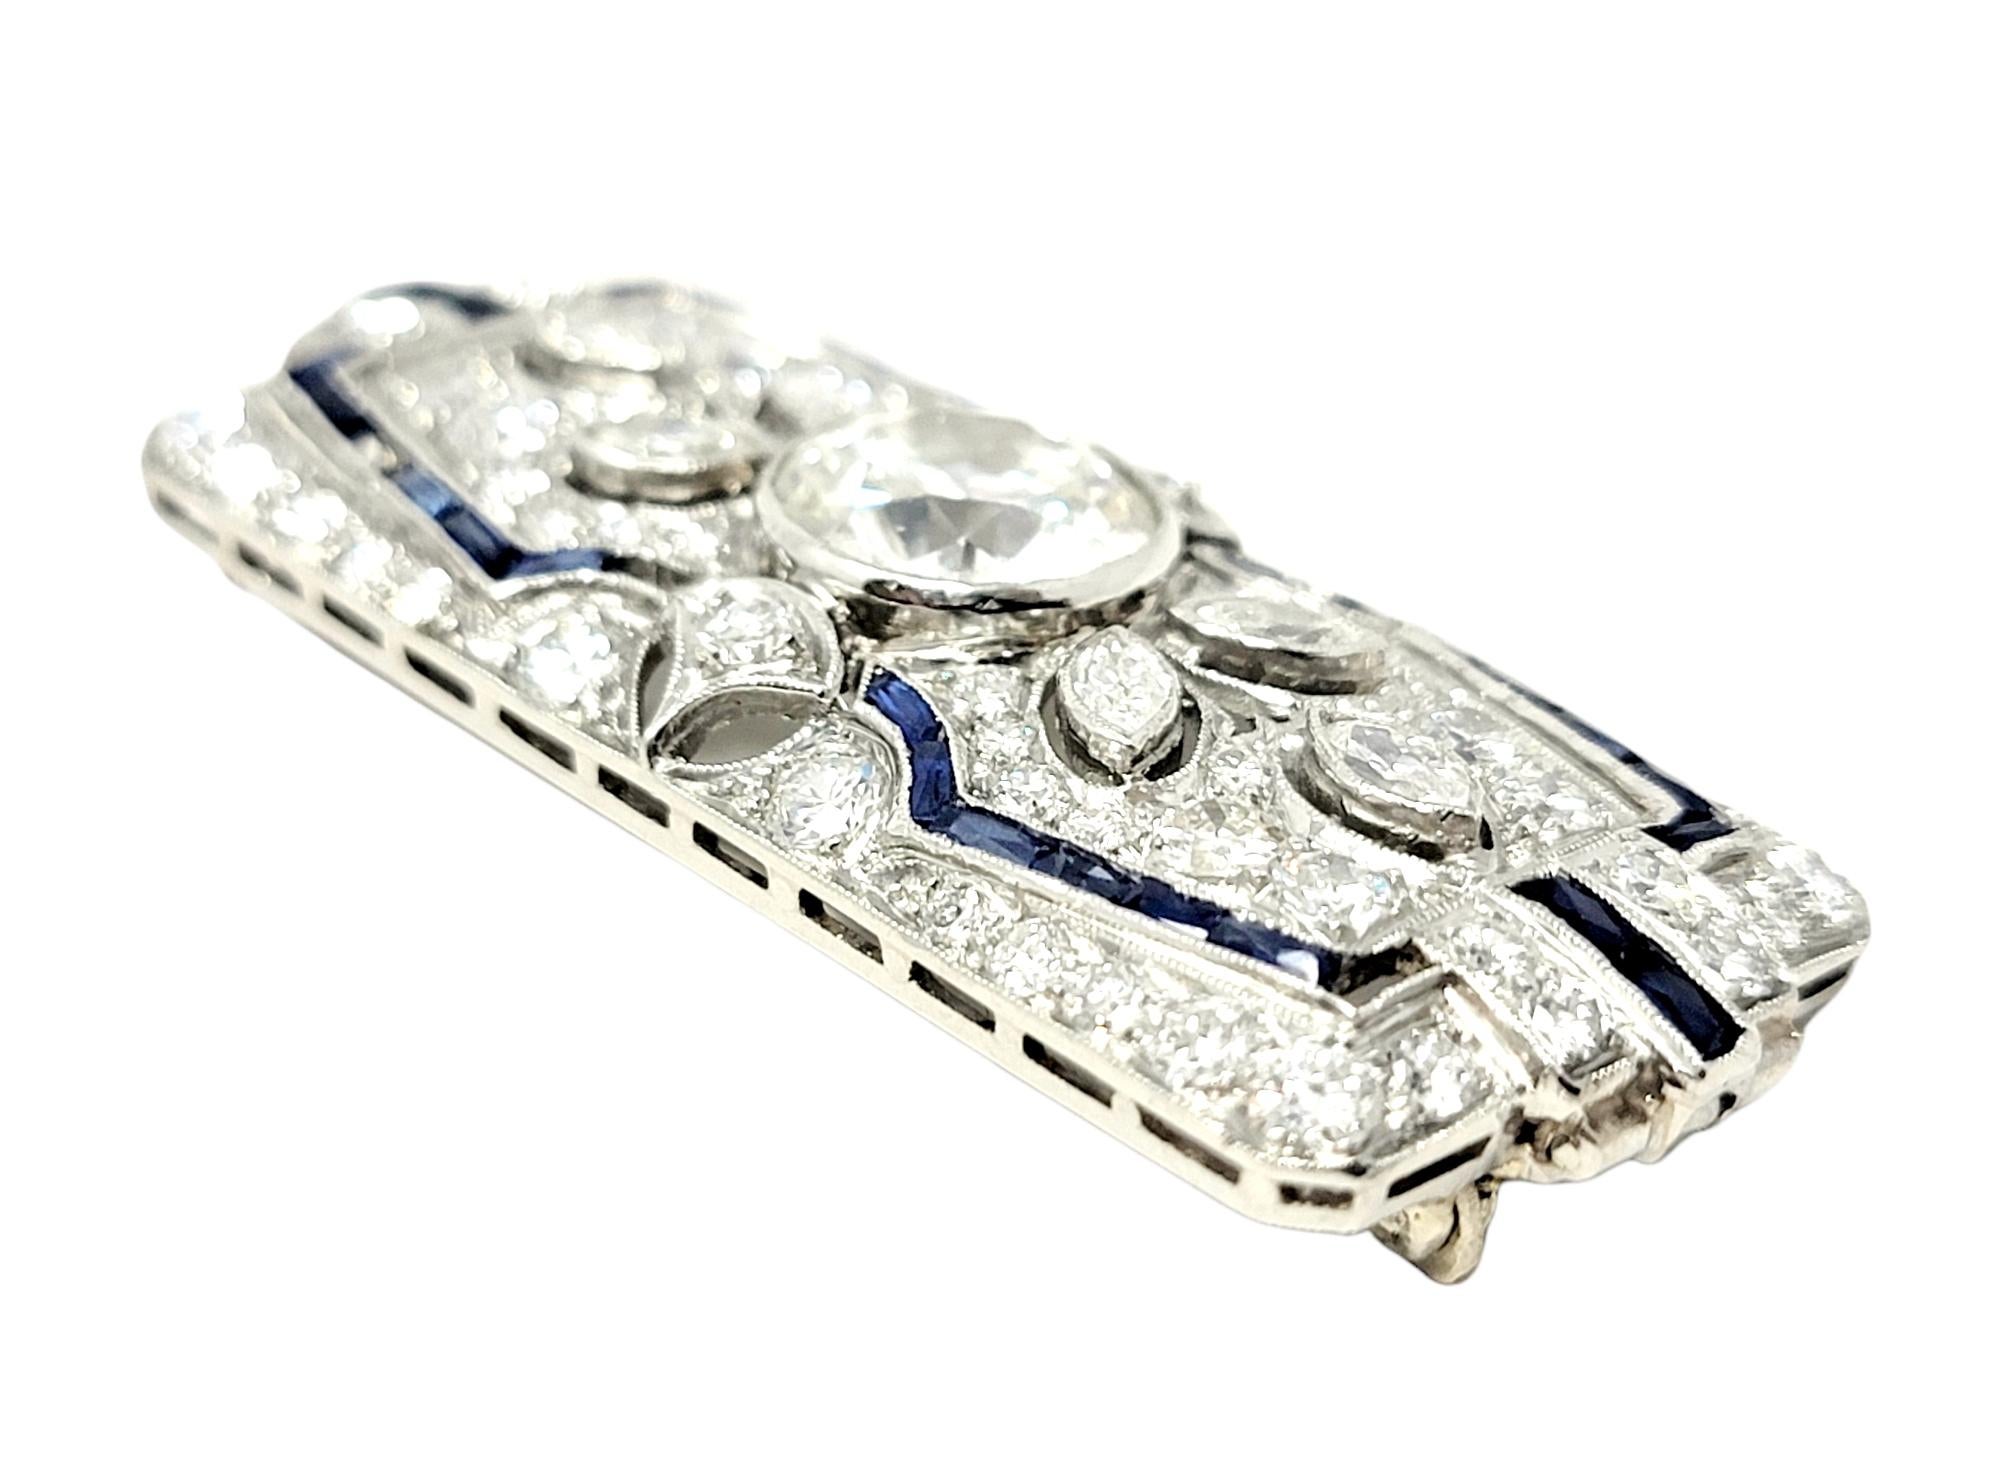 Vintage Ornate Diamond and Sapphire Rectangle Brooch/Pendant Bar in Platinum In Good Condition For Sale In Scottsdale, AZ